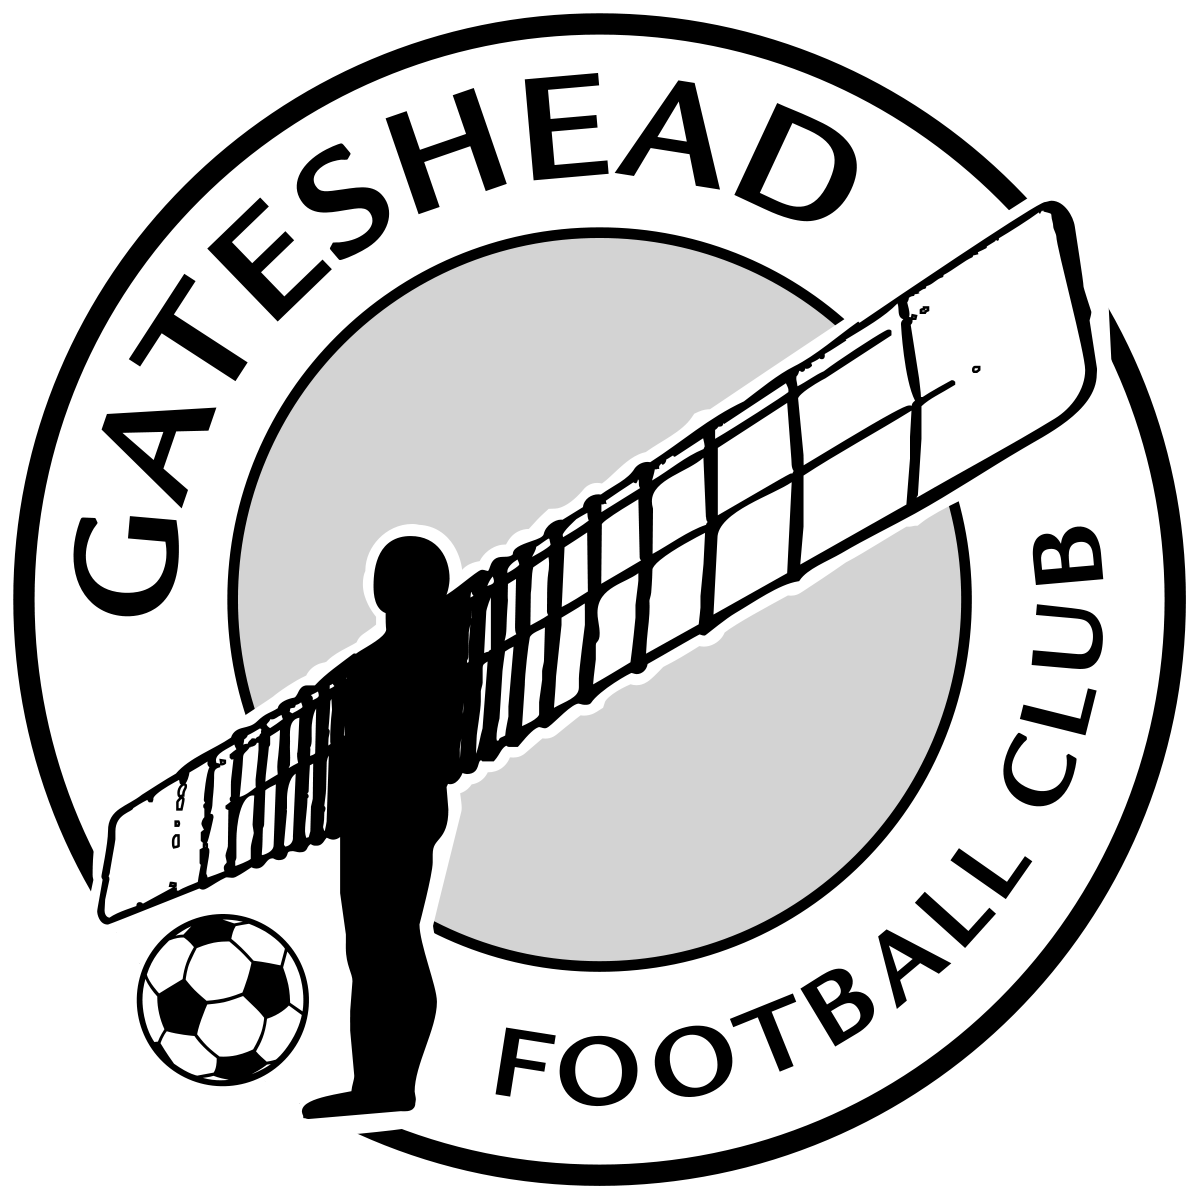 The Crowd Was Over 1,400 People - Gateshead Fc Logo (1200x1200)